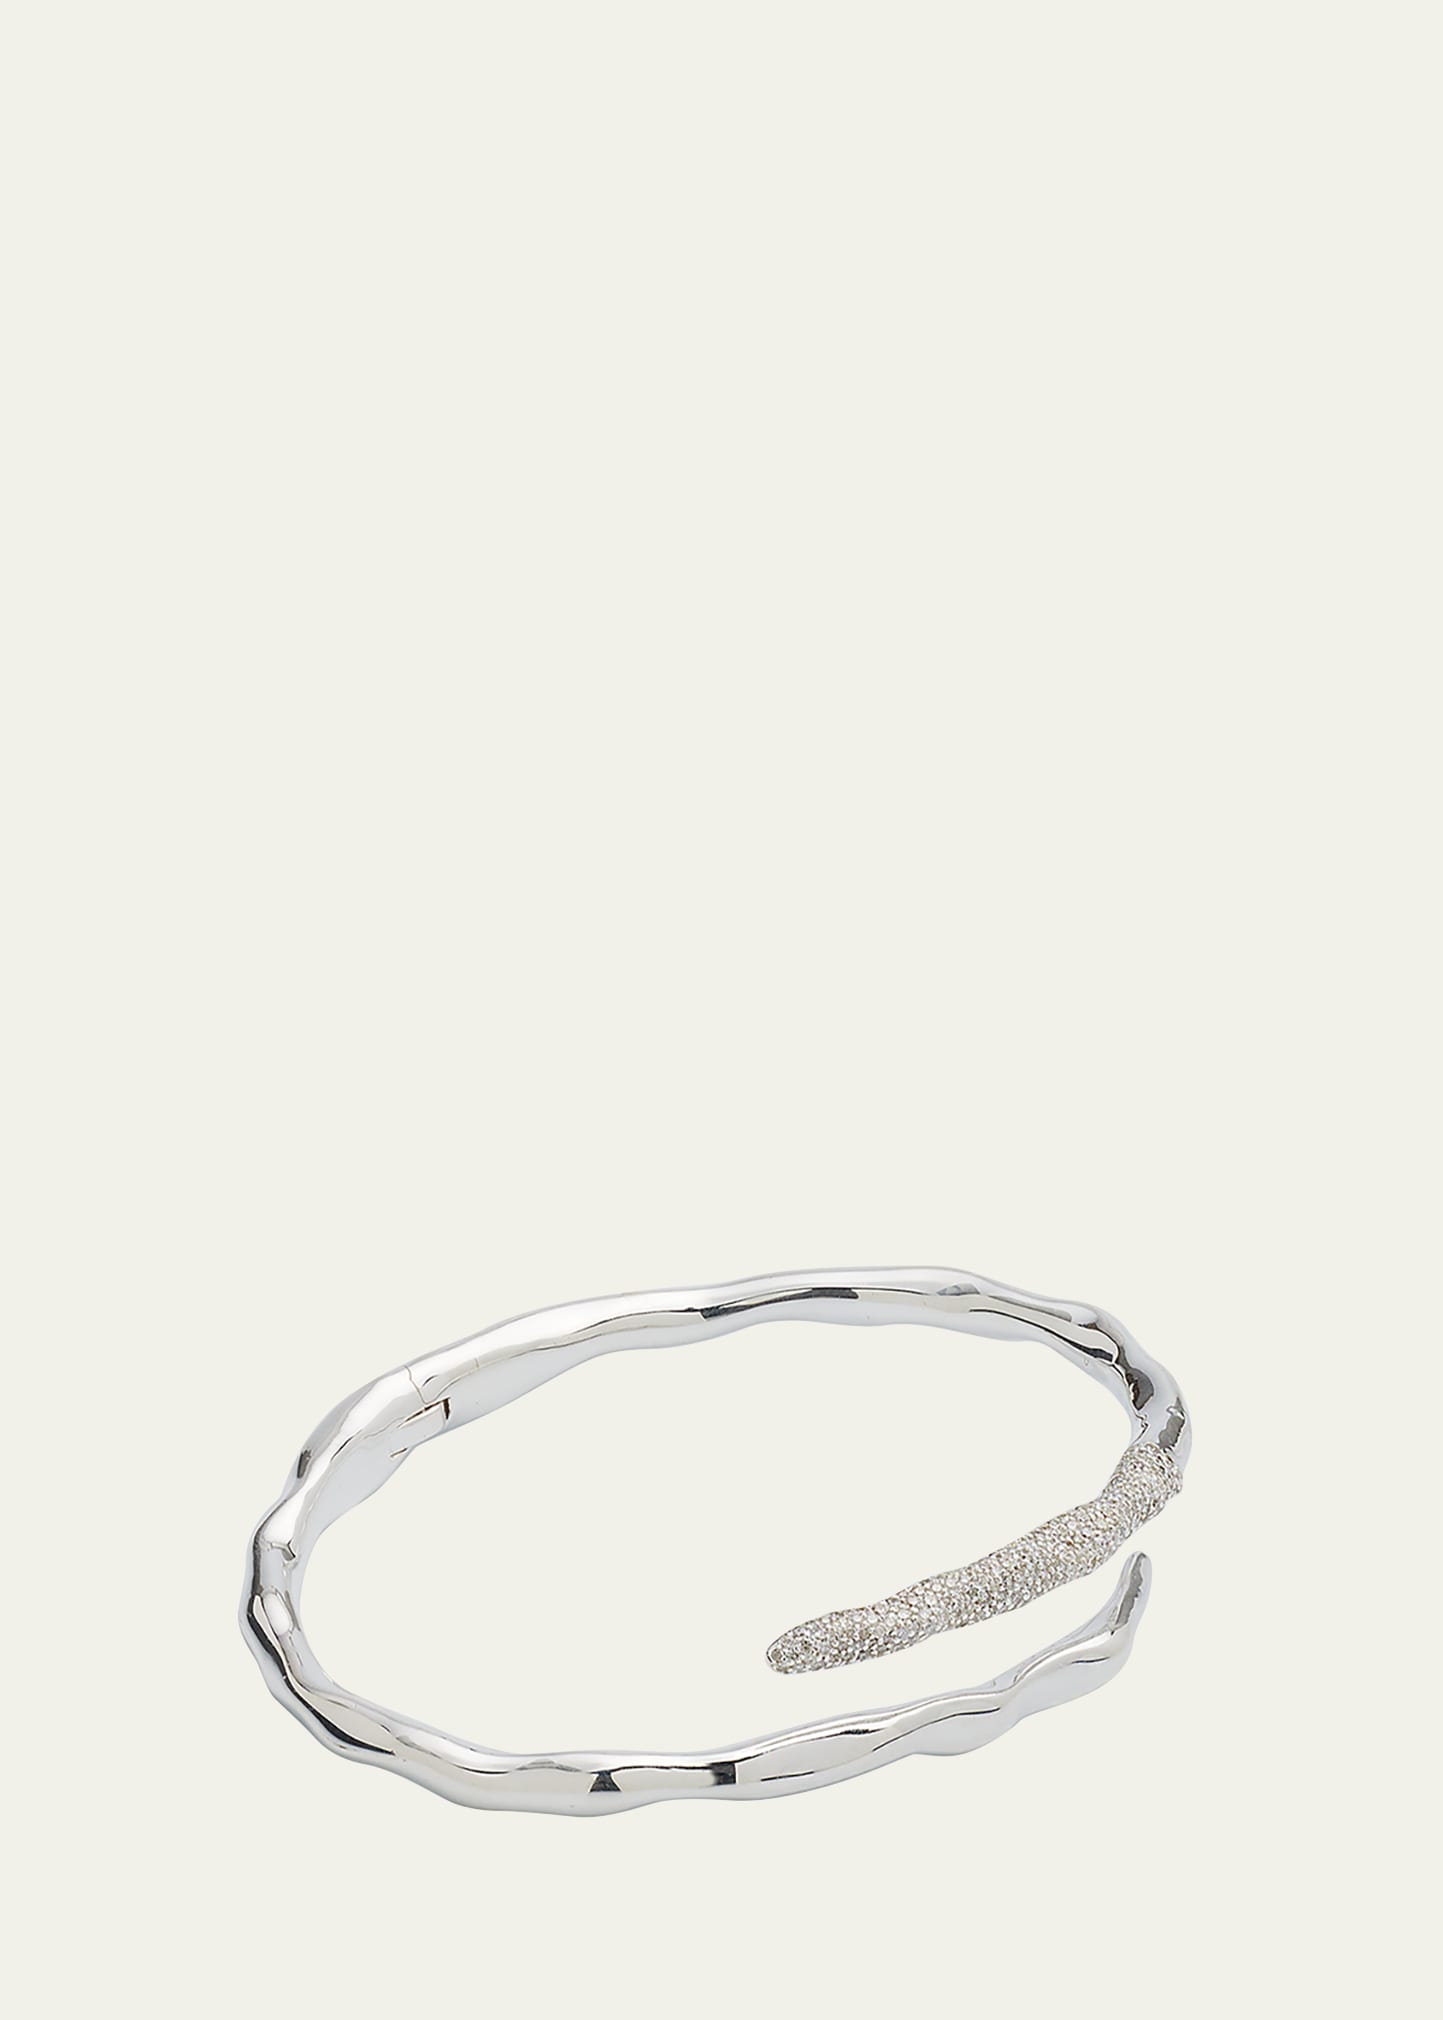 IPPOLITA HINGED BANGLE IN STERLING SILVER WITH DIAMONDS